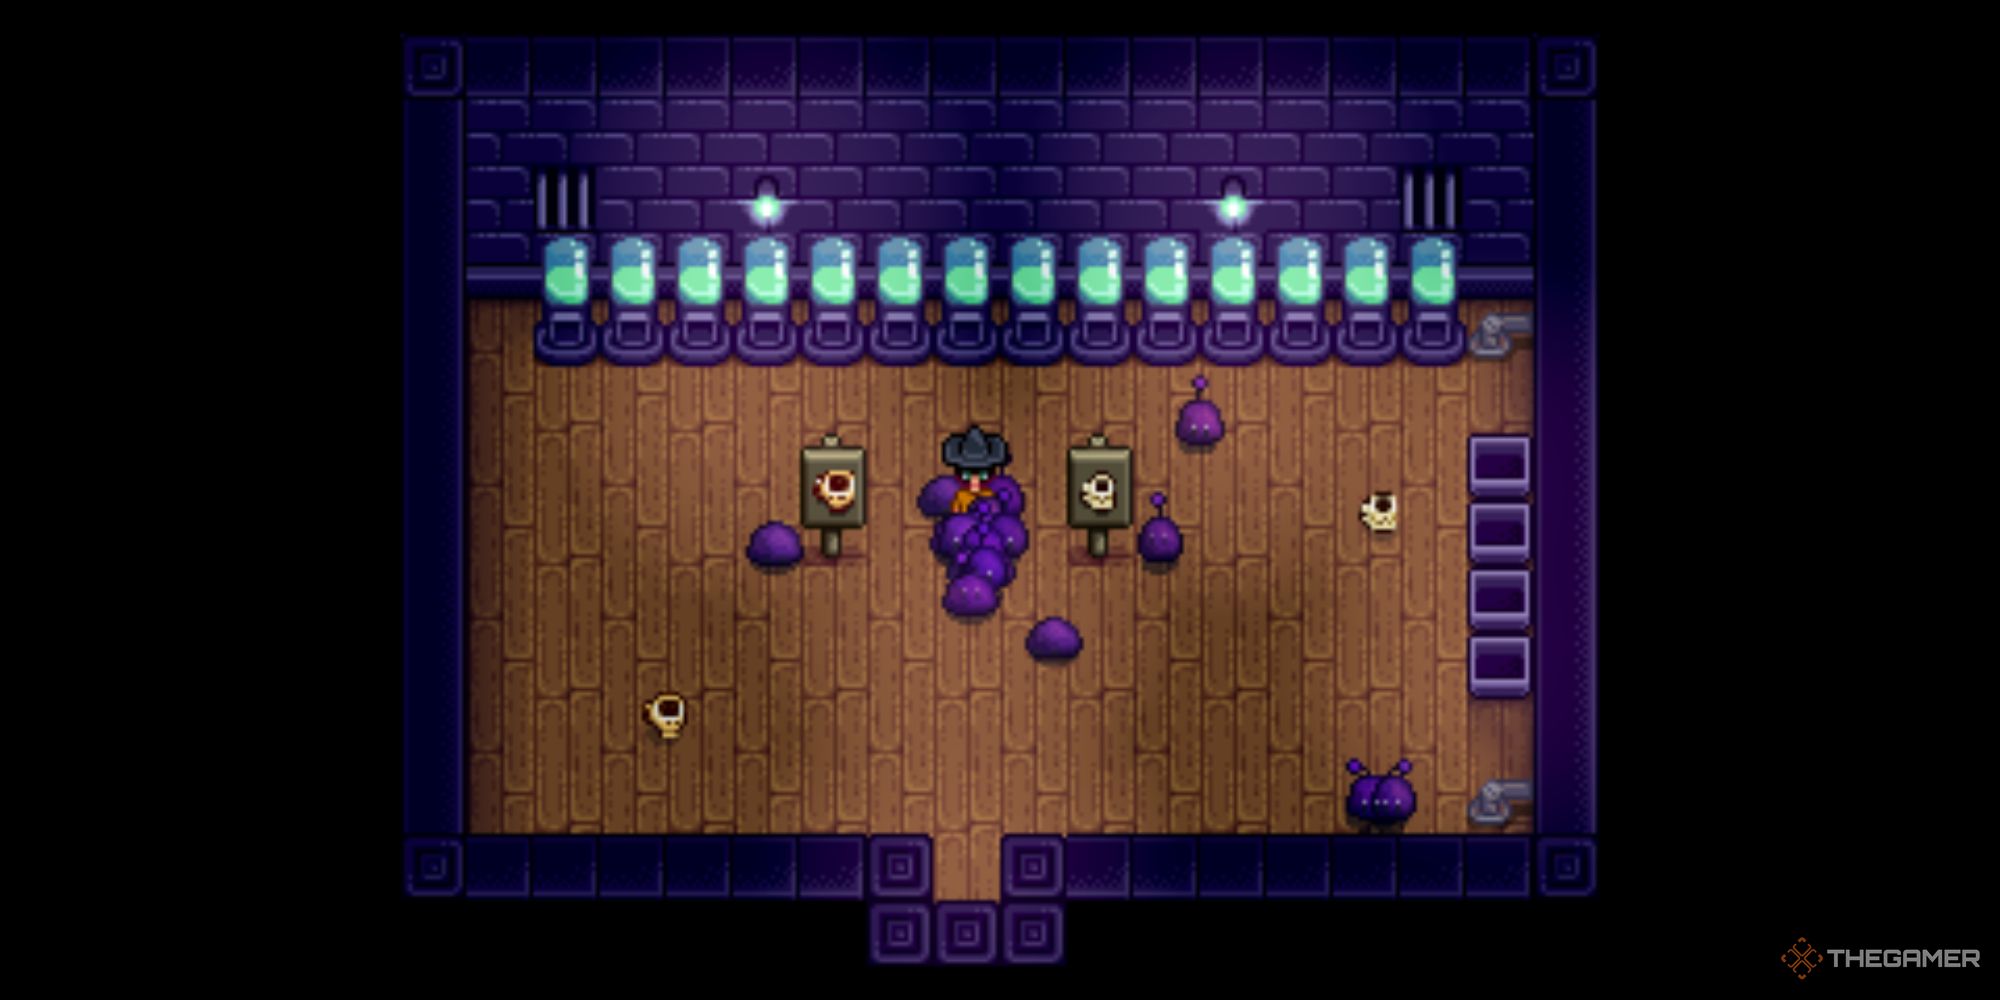 Standing in a slime hutch surrounded by purple slimes while signs show coffee and espresso in stardew valley - there is espresso and coffee on the ground as well